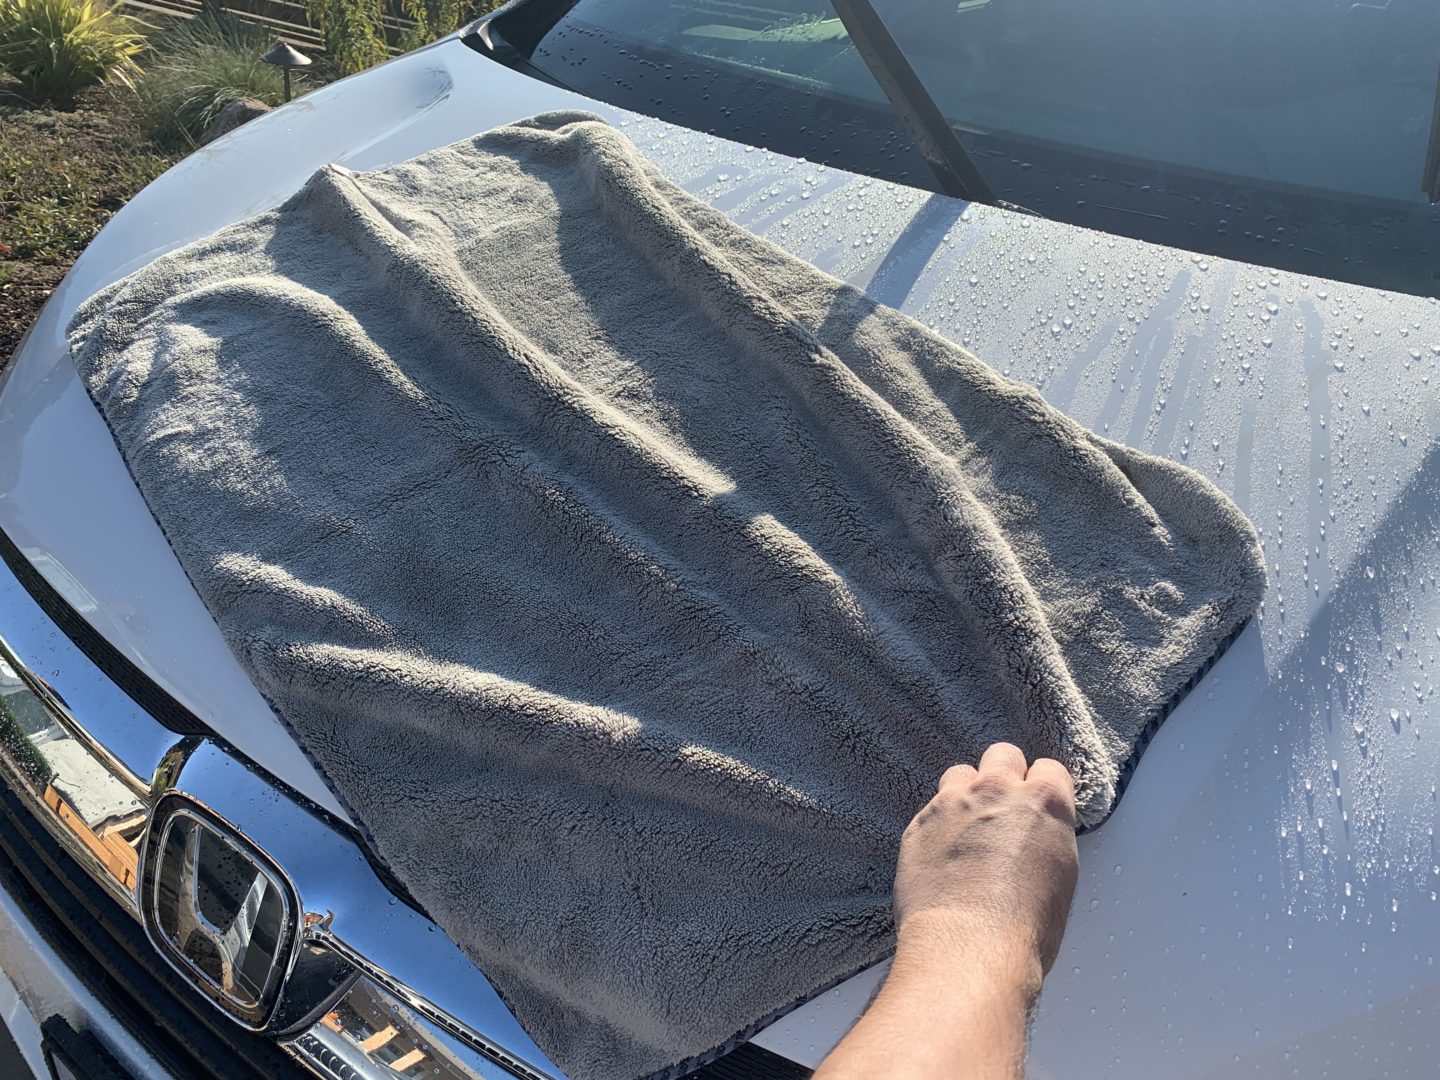 Chemical Guys Woolly Mammoth Microfiber Drying Towel Review - The Track  Ahead